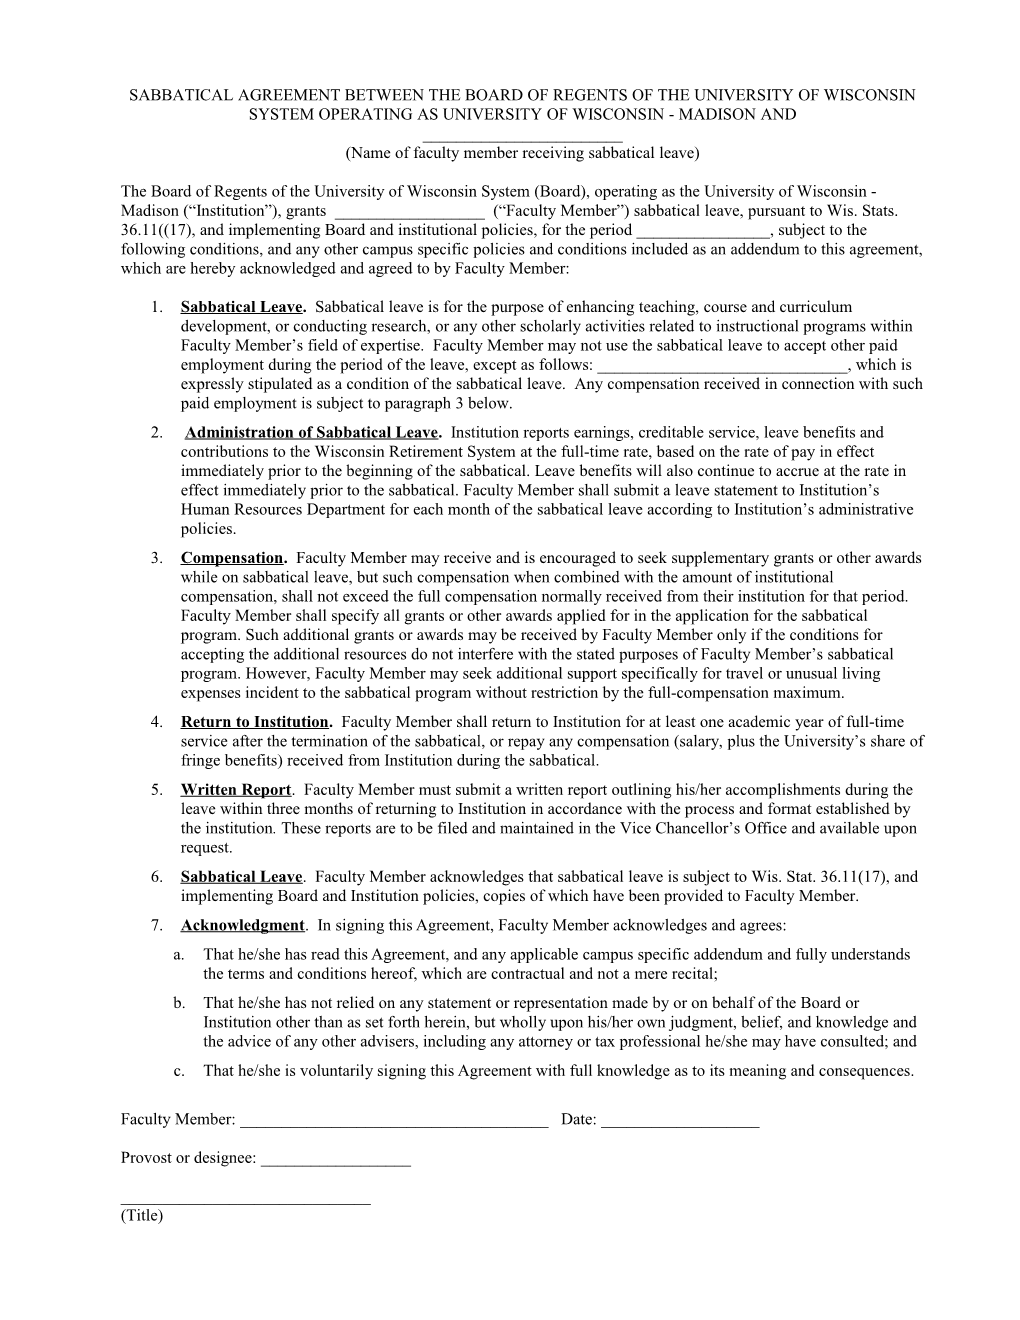 Standard Agreement Between University of Wisconsin System And